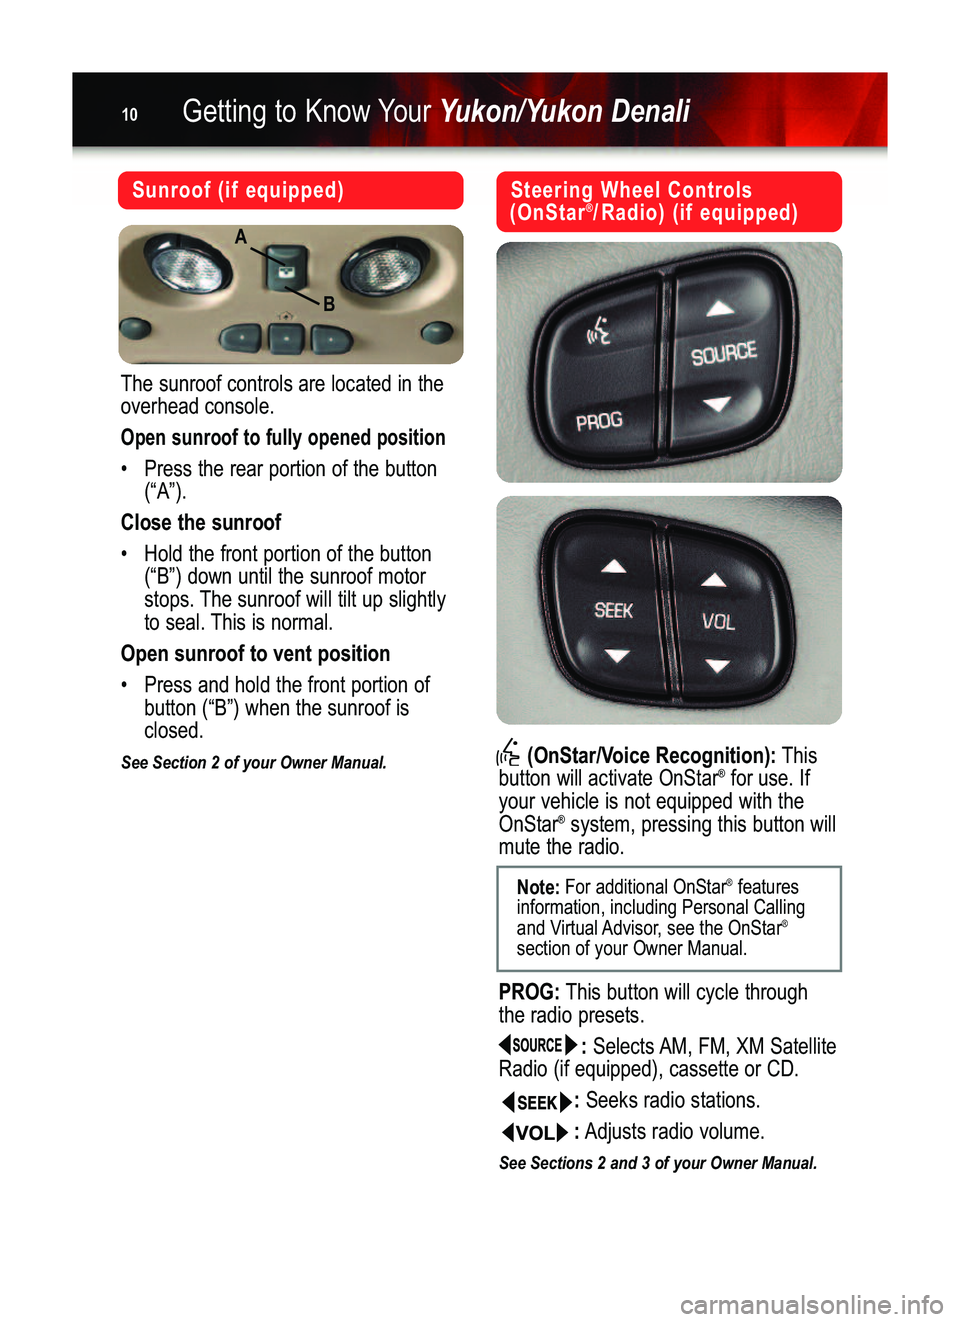 GMC YUKON 2006  Get To Know Guide Getting to Know YourYukon/Yukon Denali10
Sunroof (if equipped)
The sunroof controls are located in the
overhead console.
Open sunroof to fully opened position
• Press the rear portion of the button
